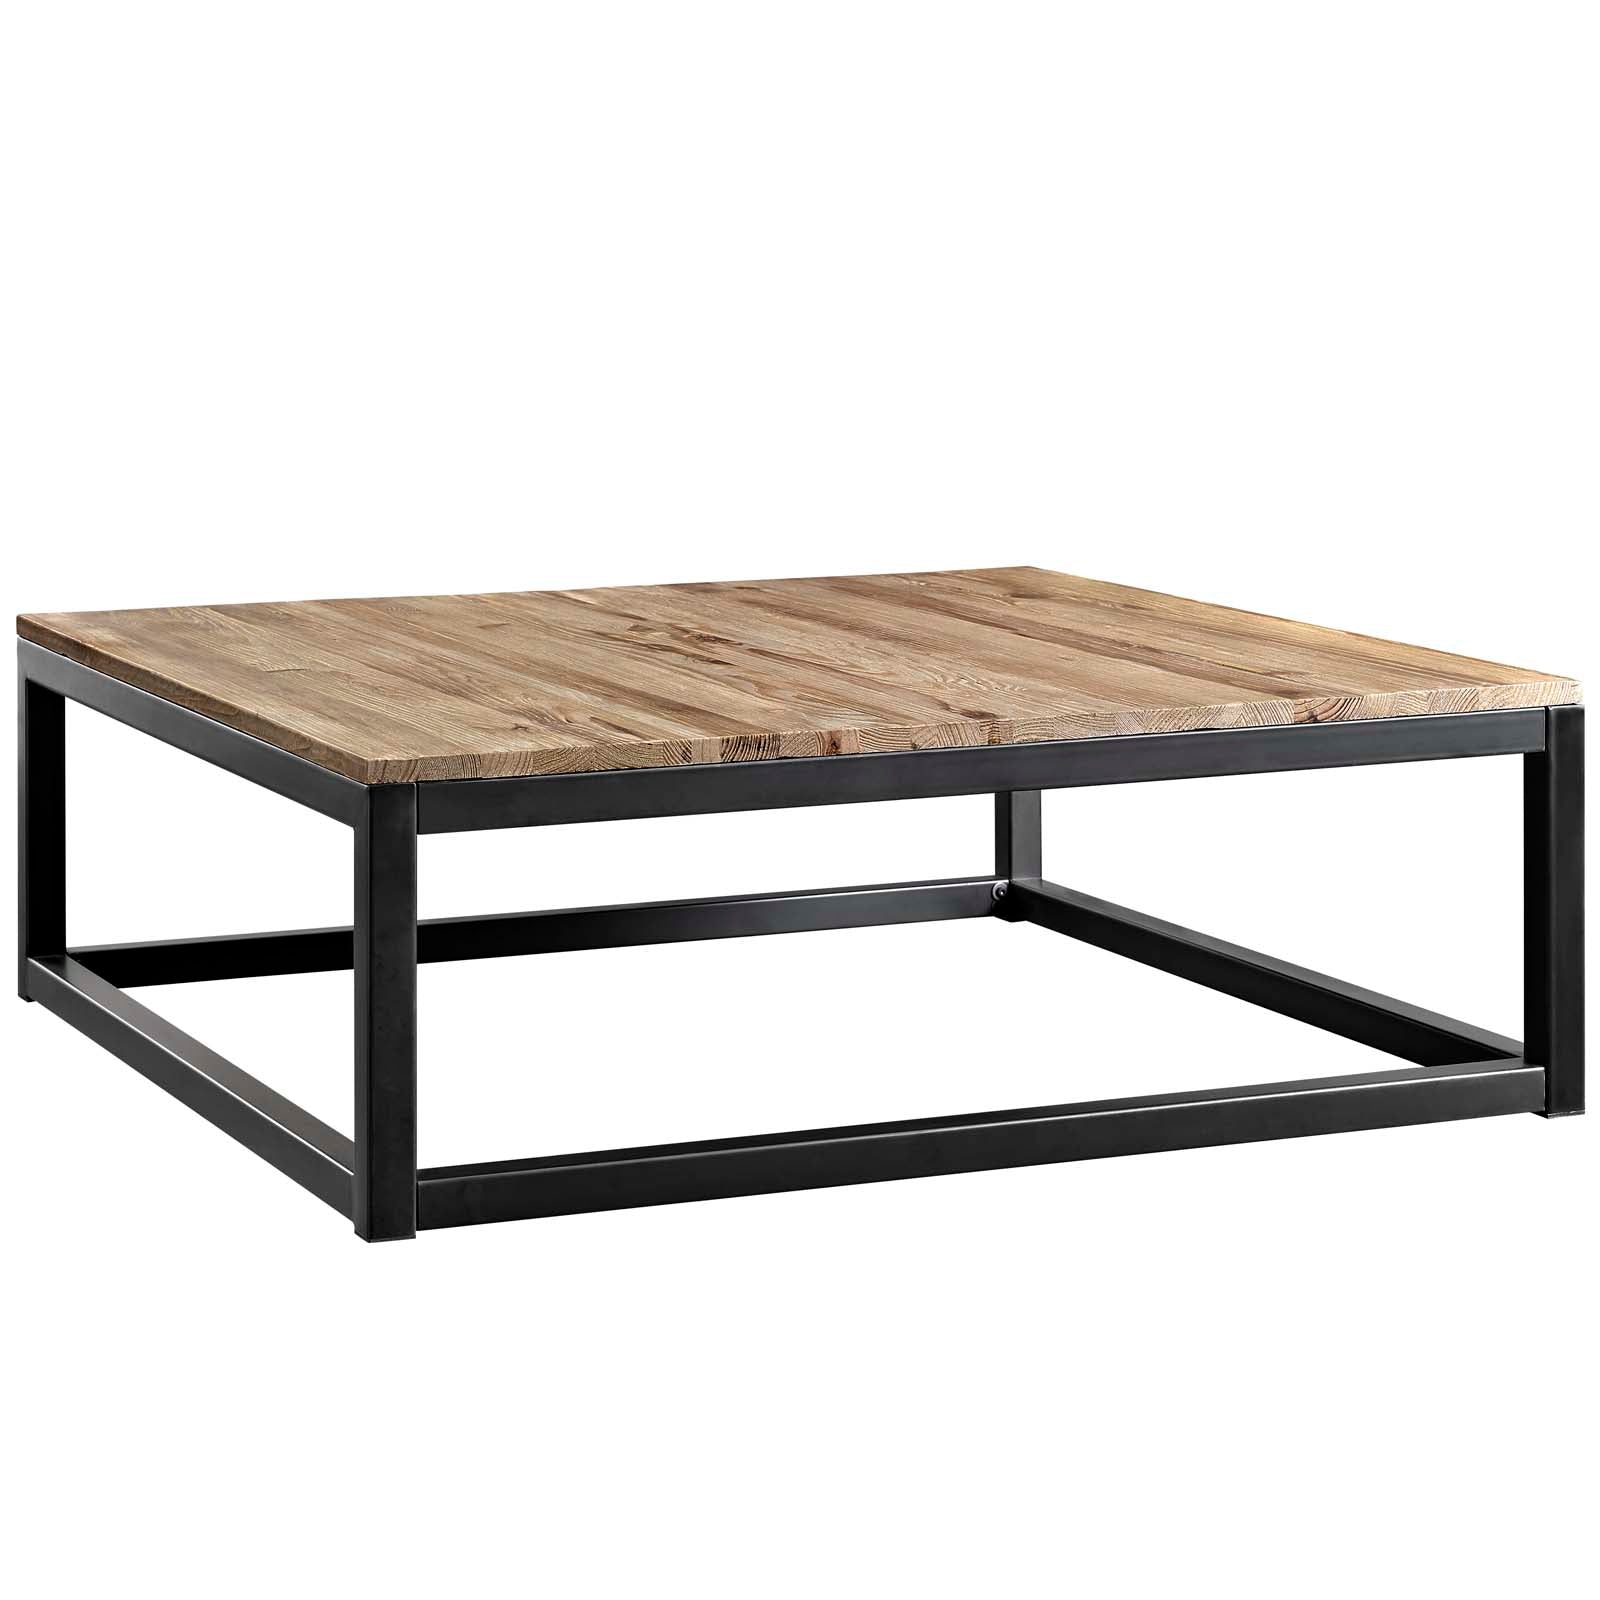 Modway Coffee Tables - Attune Large Coffee Table Brown